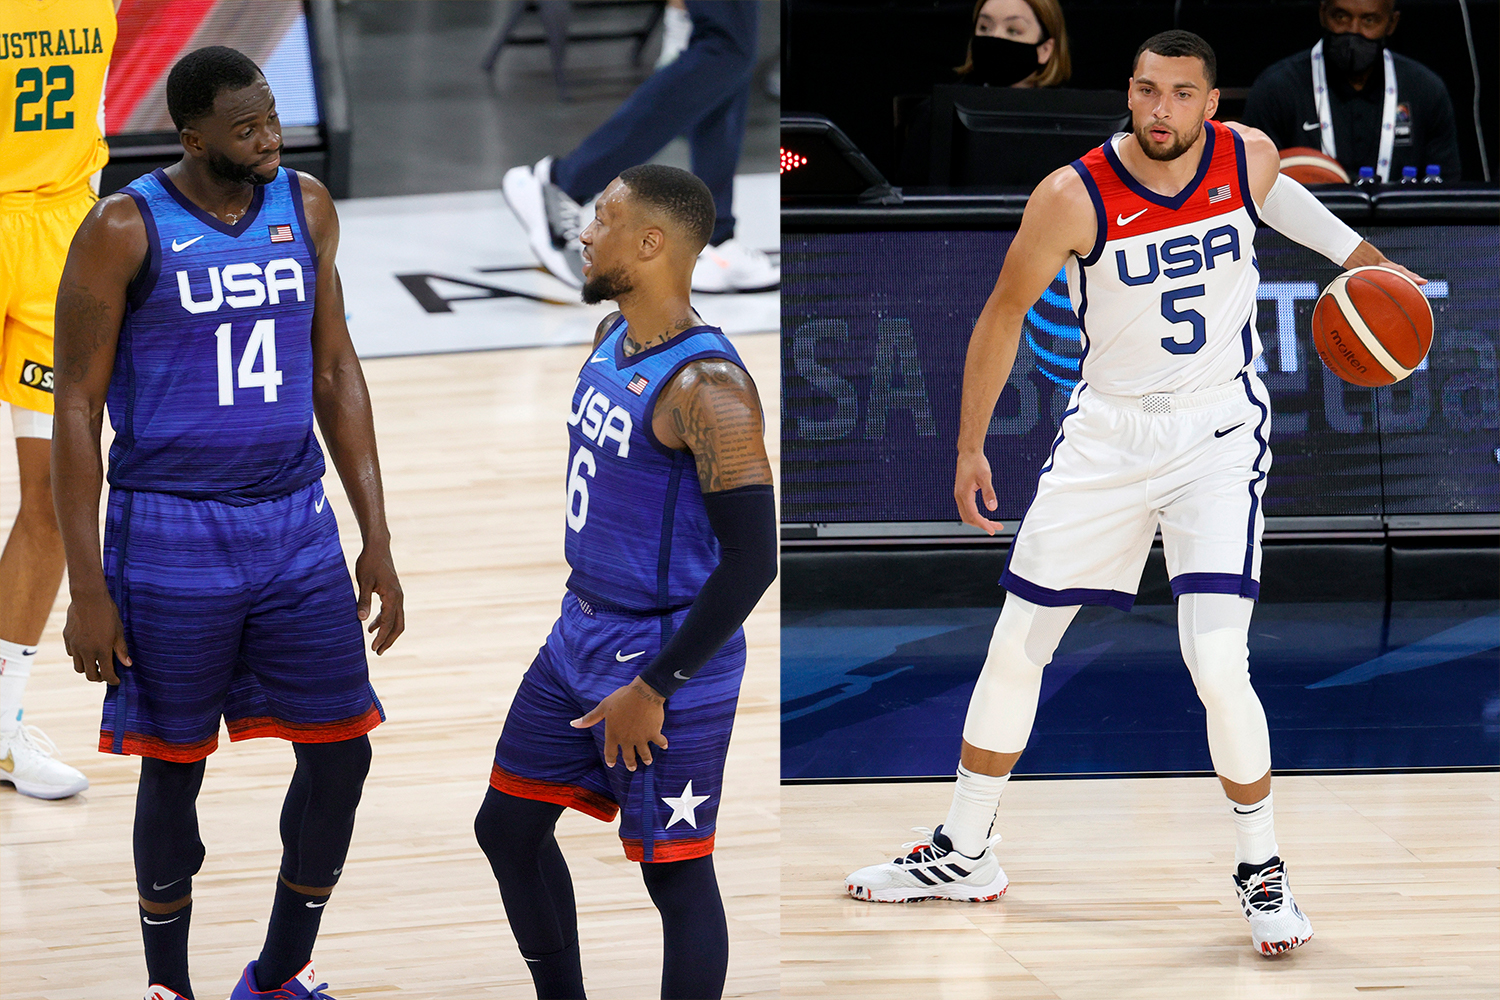 The two uniform designs the USA men's hoops team will be wearing at the Tokyo Olympics